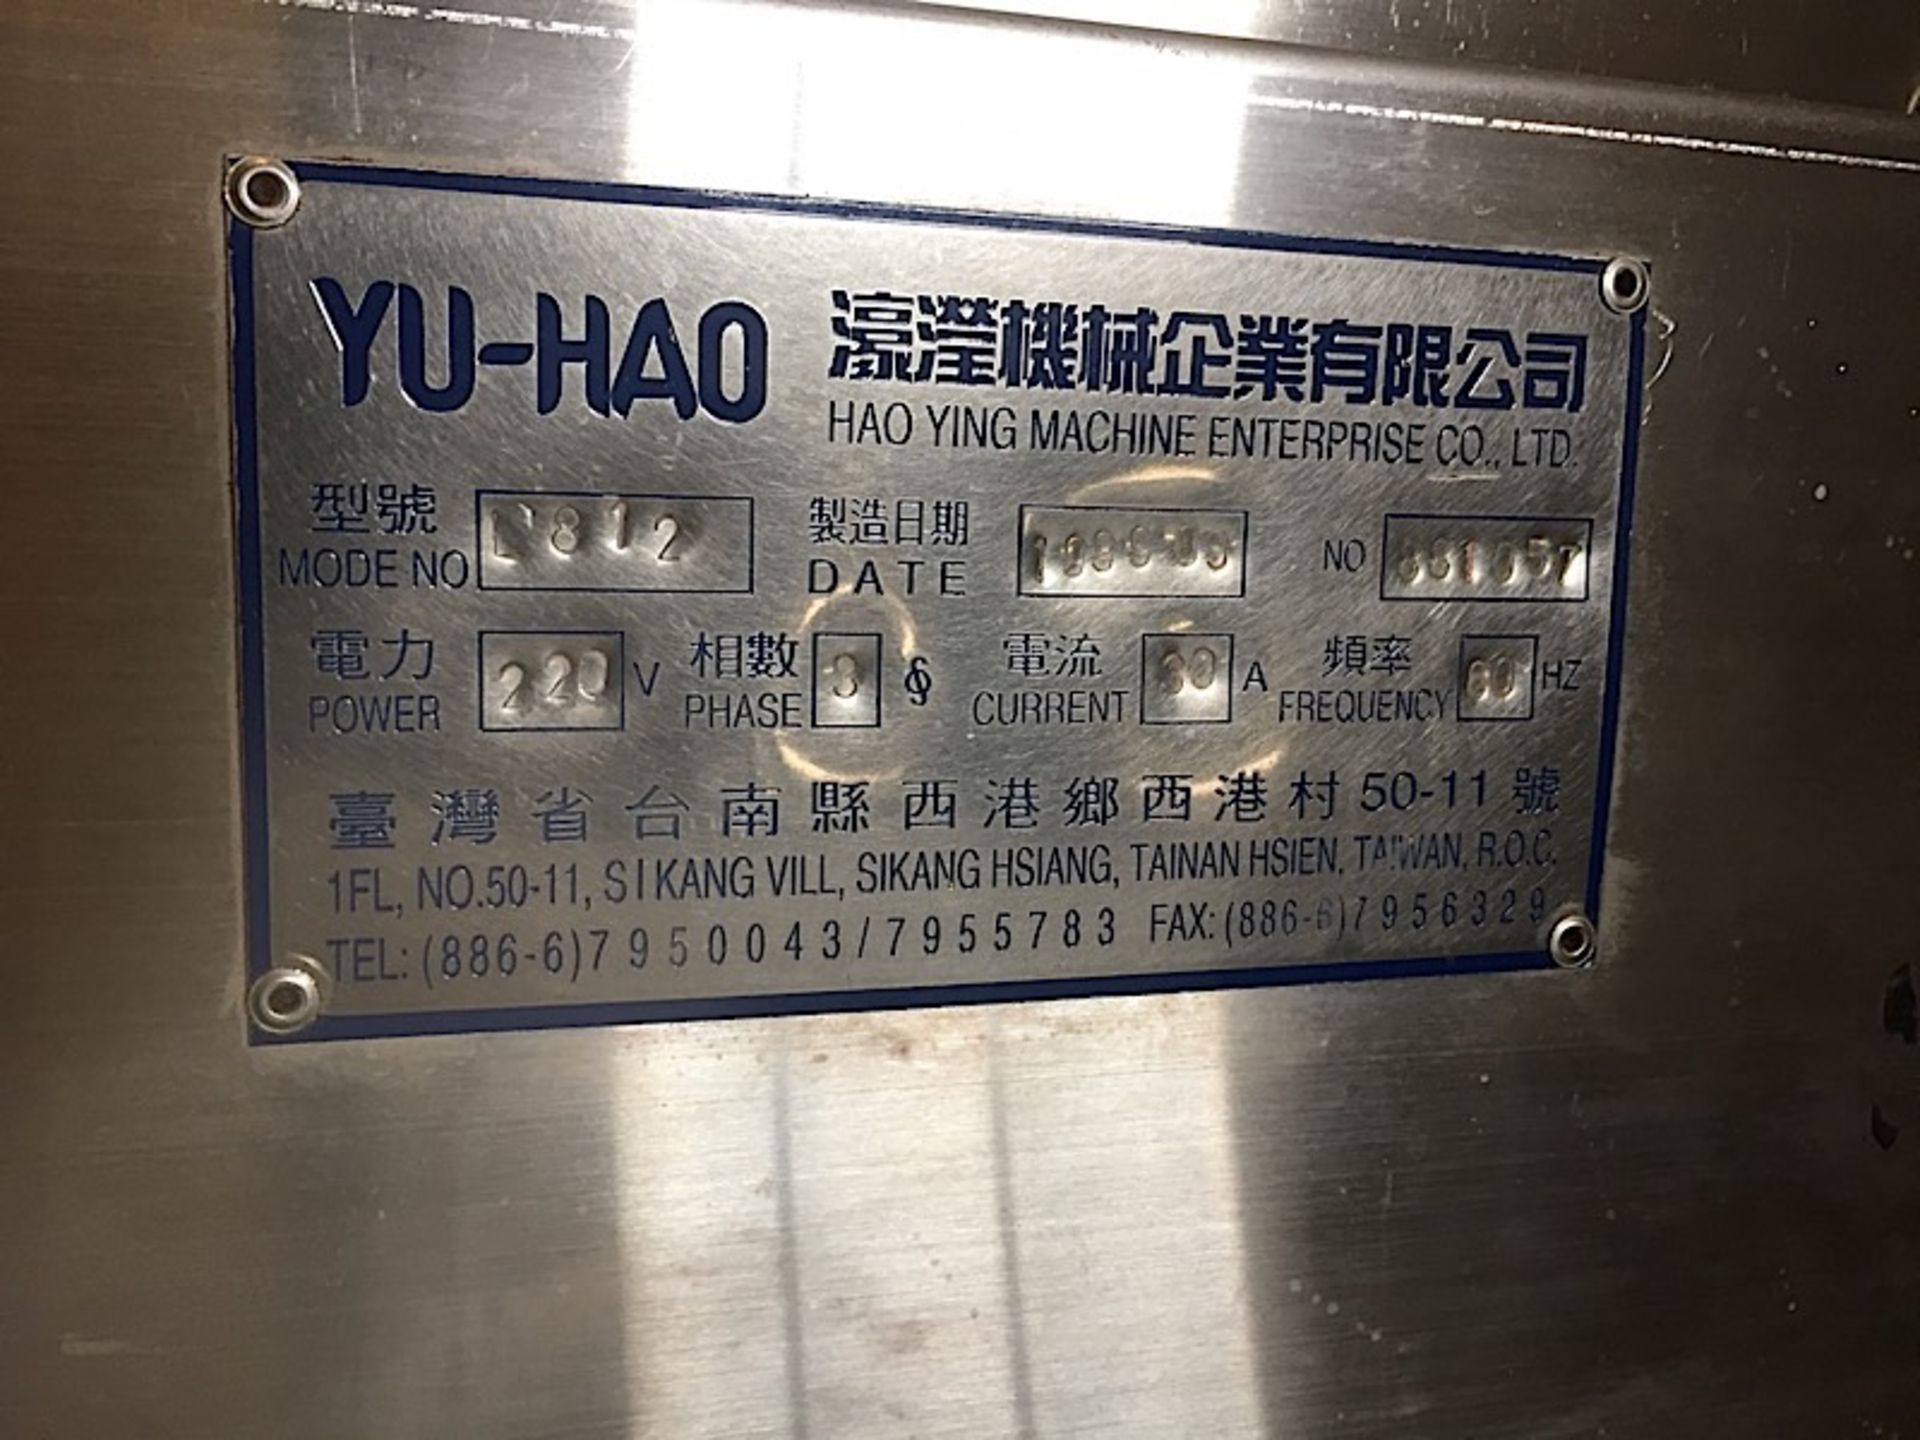 1999 YUHAO FILLING MACHINE (L812) - Image 4 of 4